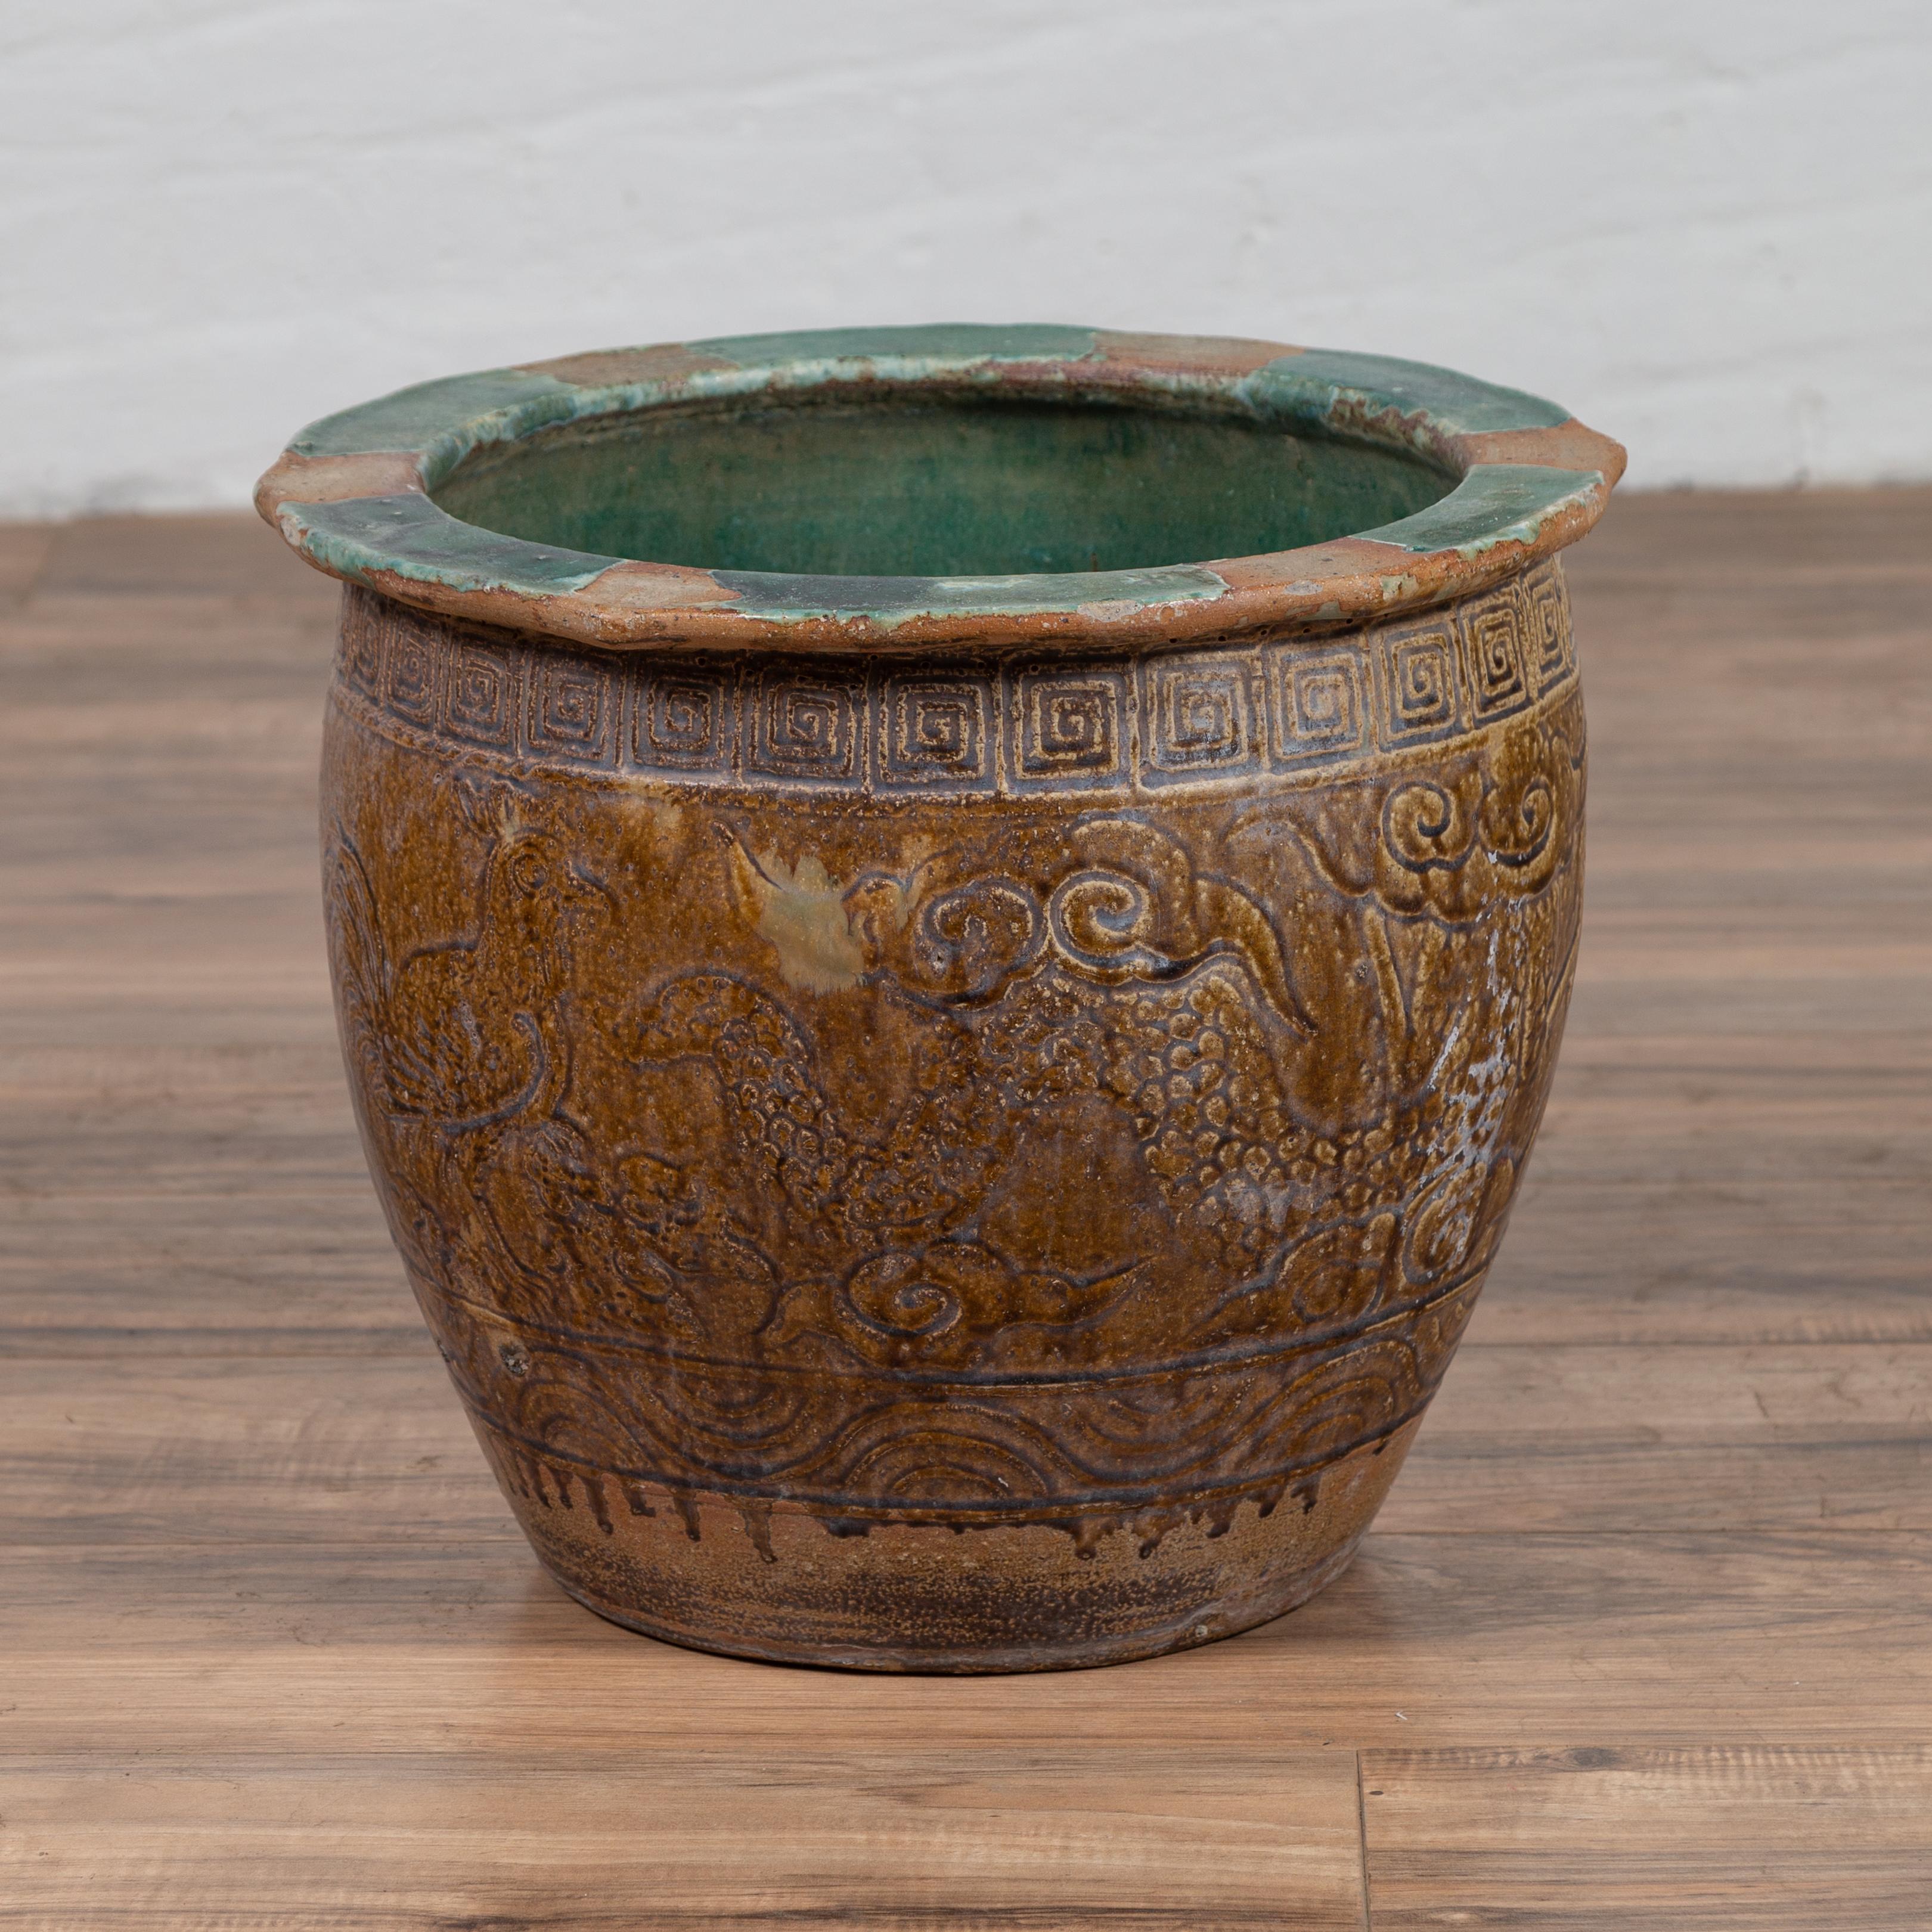 A Chinese antique planter from the early 20th century with weathered patina, green and brown glaze, meanders, animals and scrolled clouds. Born in China during the early years of the 20th century, this large planter charms us with its nicely aged